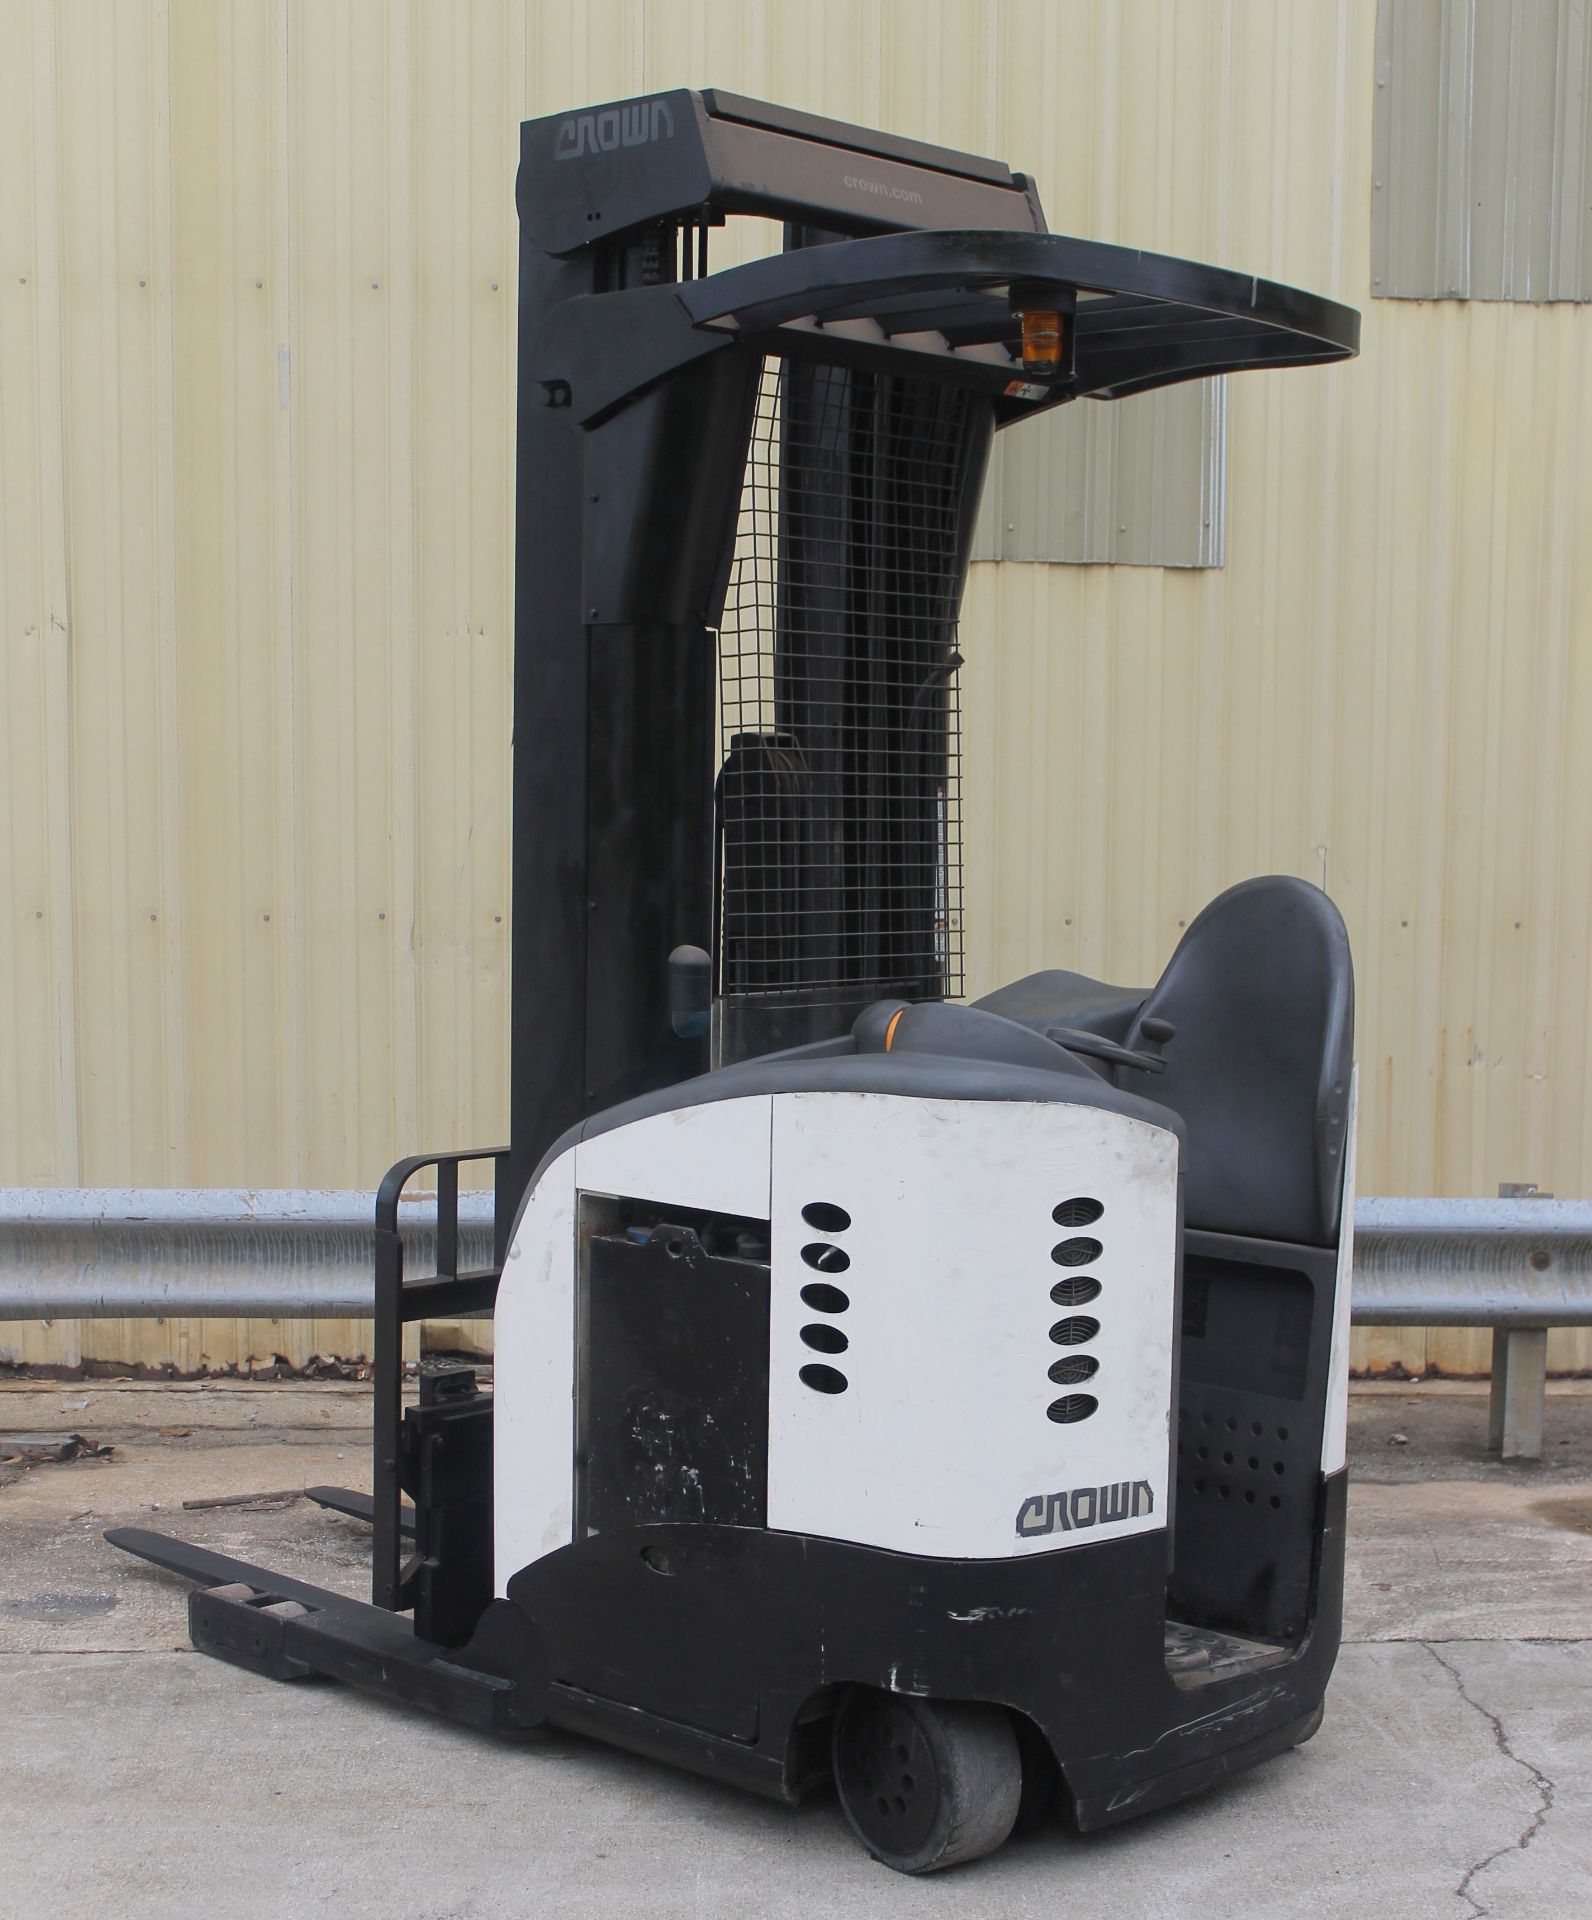 CROWN RD 5000 SERIES NARROW-AISLE REACH TRUCK, DOUBLE REACH, (WATCH VIDEO) - Image 4 of 6